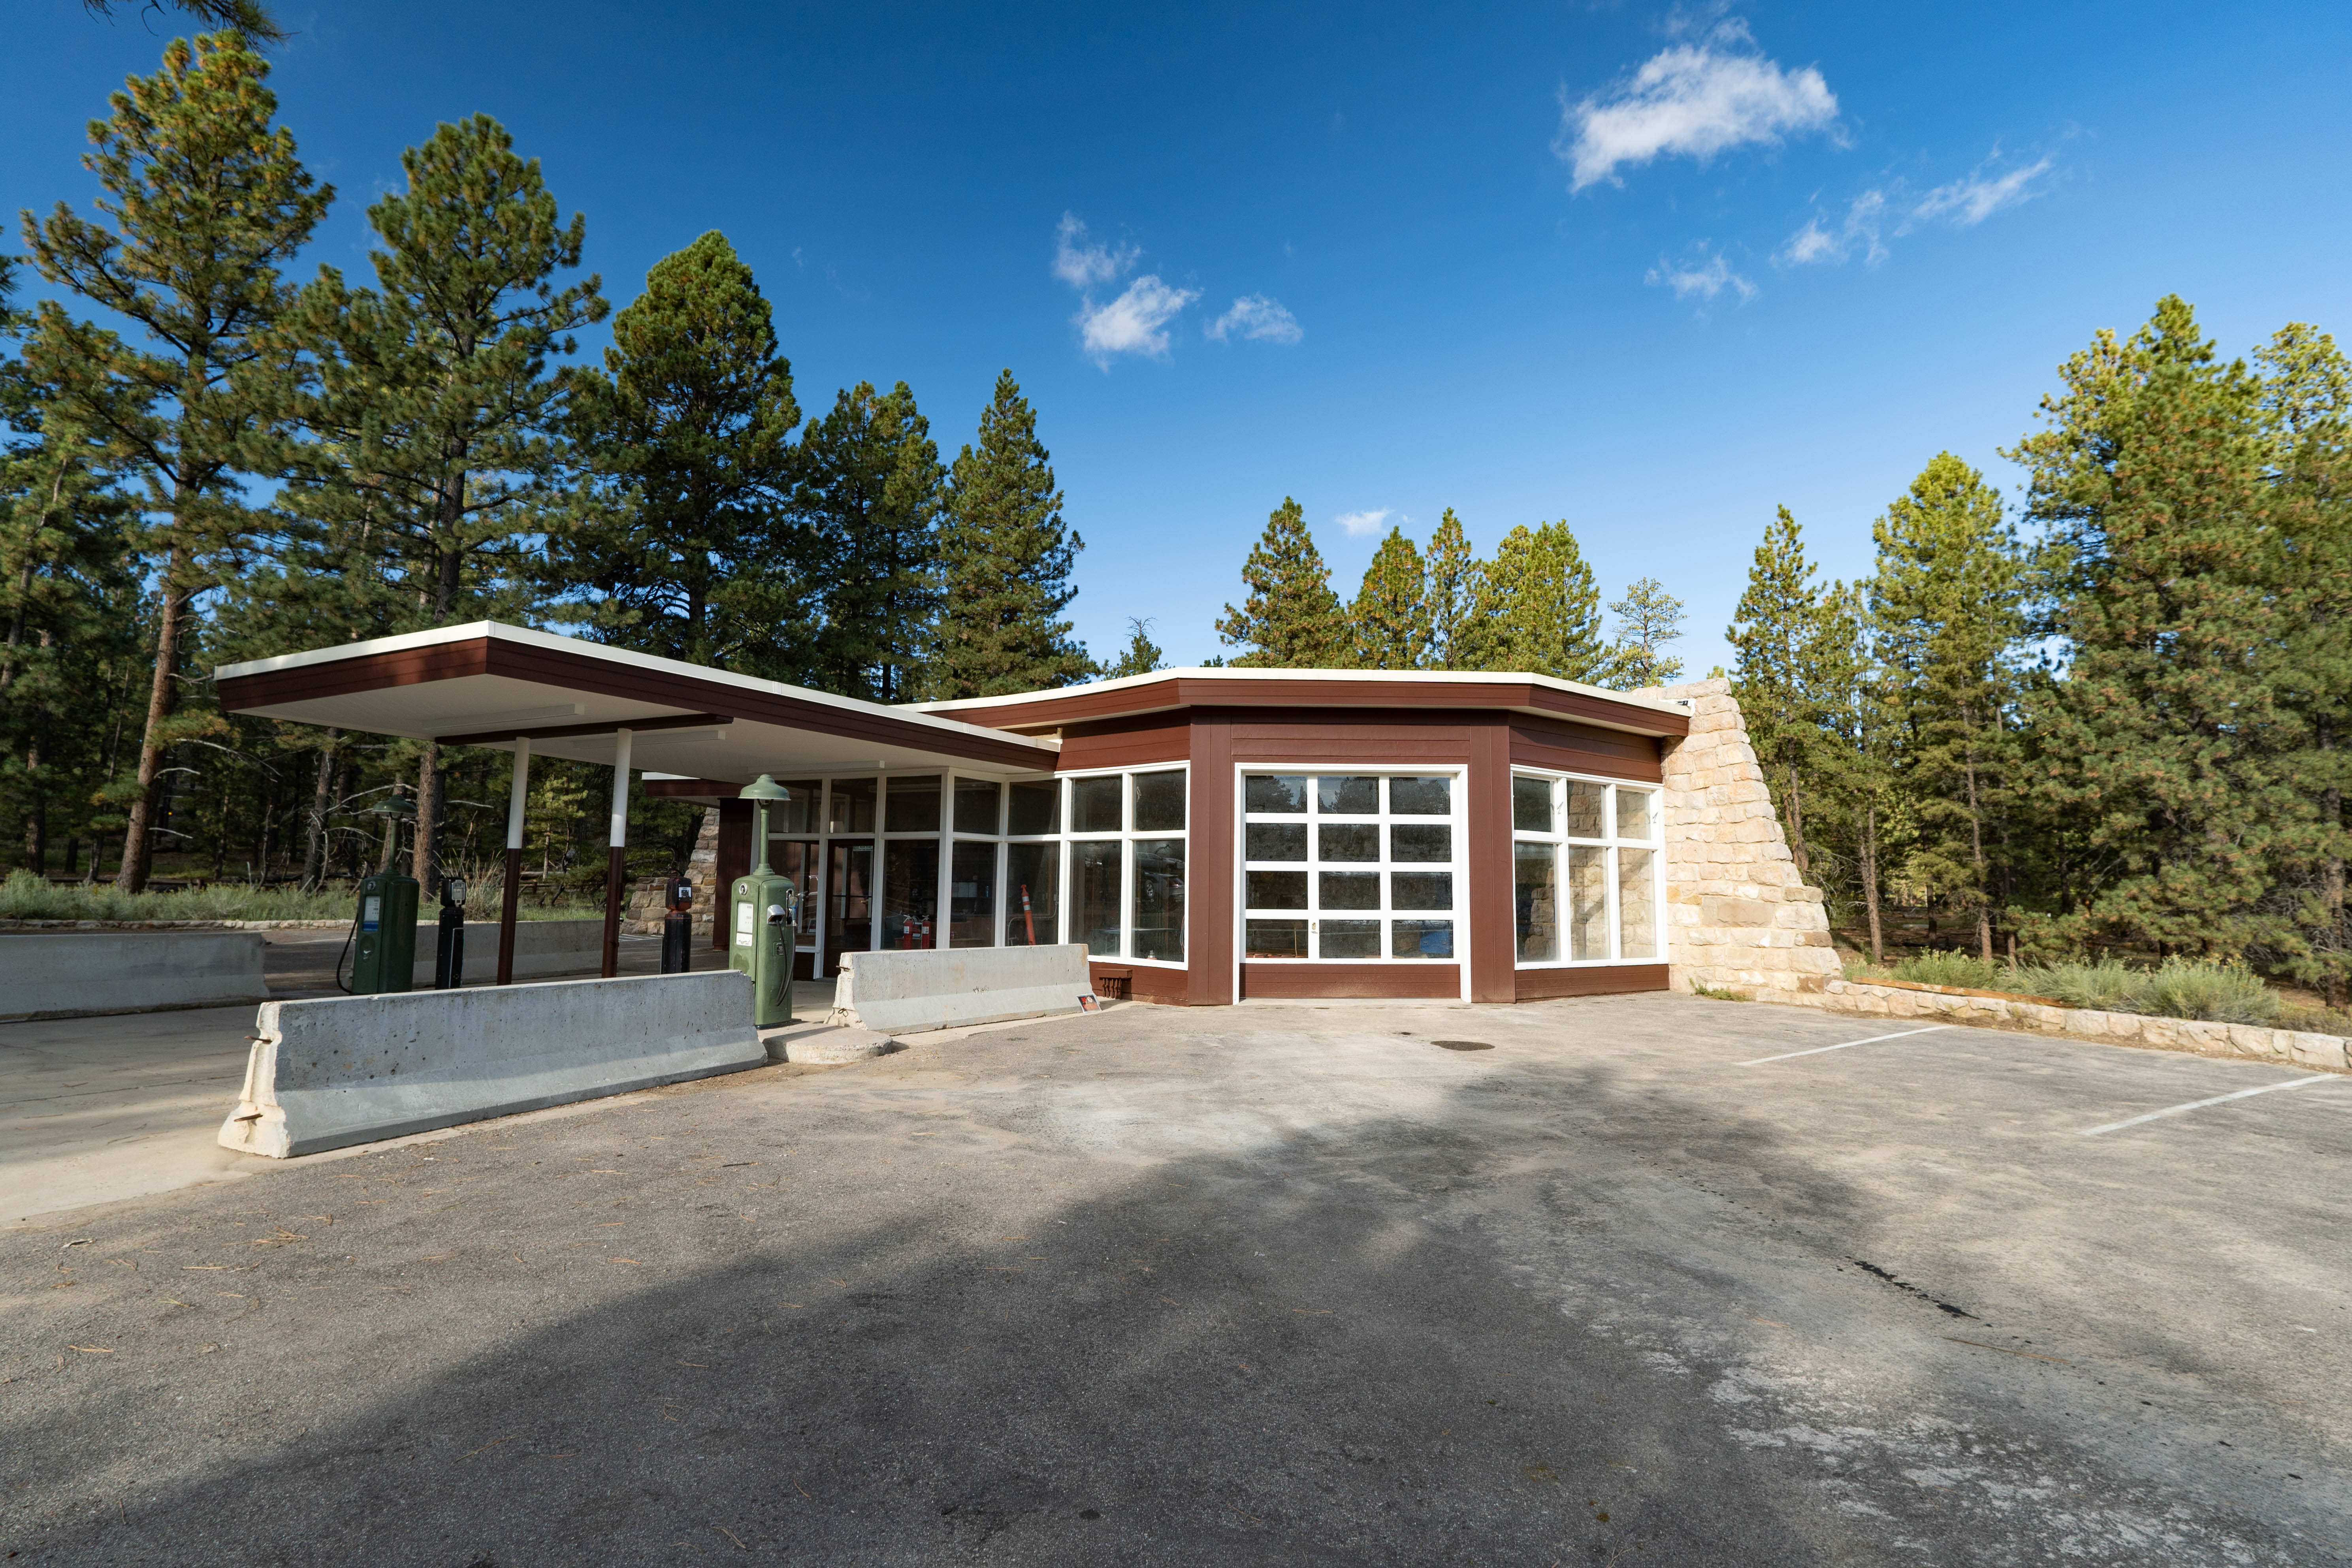 A modernist building painted brown and white with large glass windows and flat roof lines. This is a gas station built in the late 1940s, situated within a pine forest in a small parking lot.